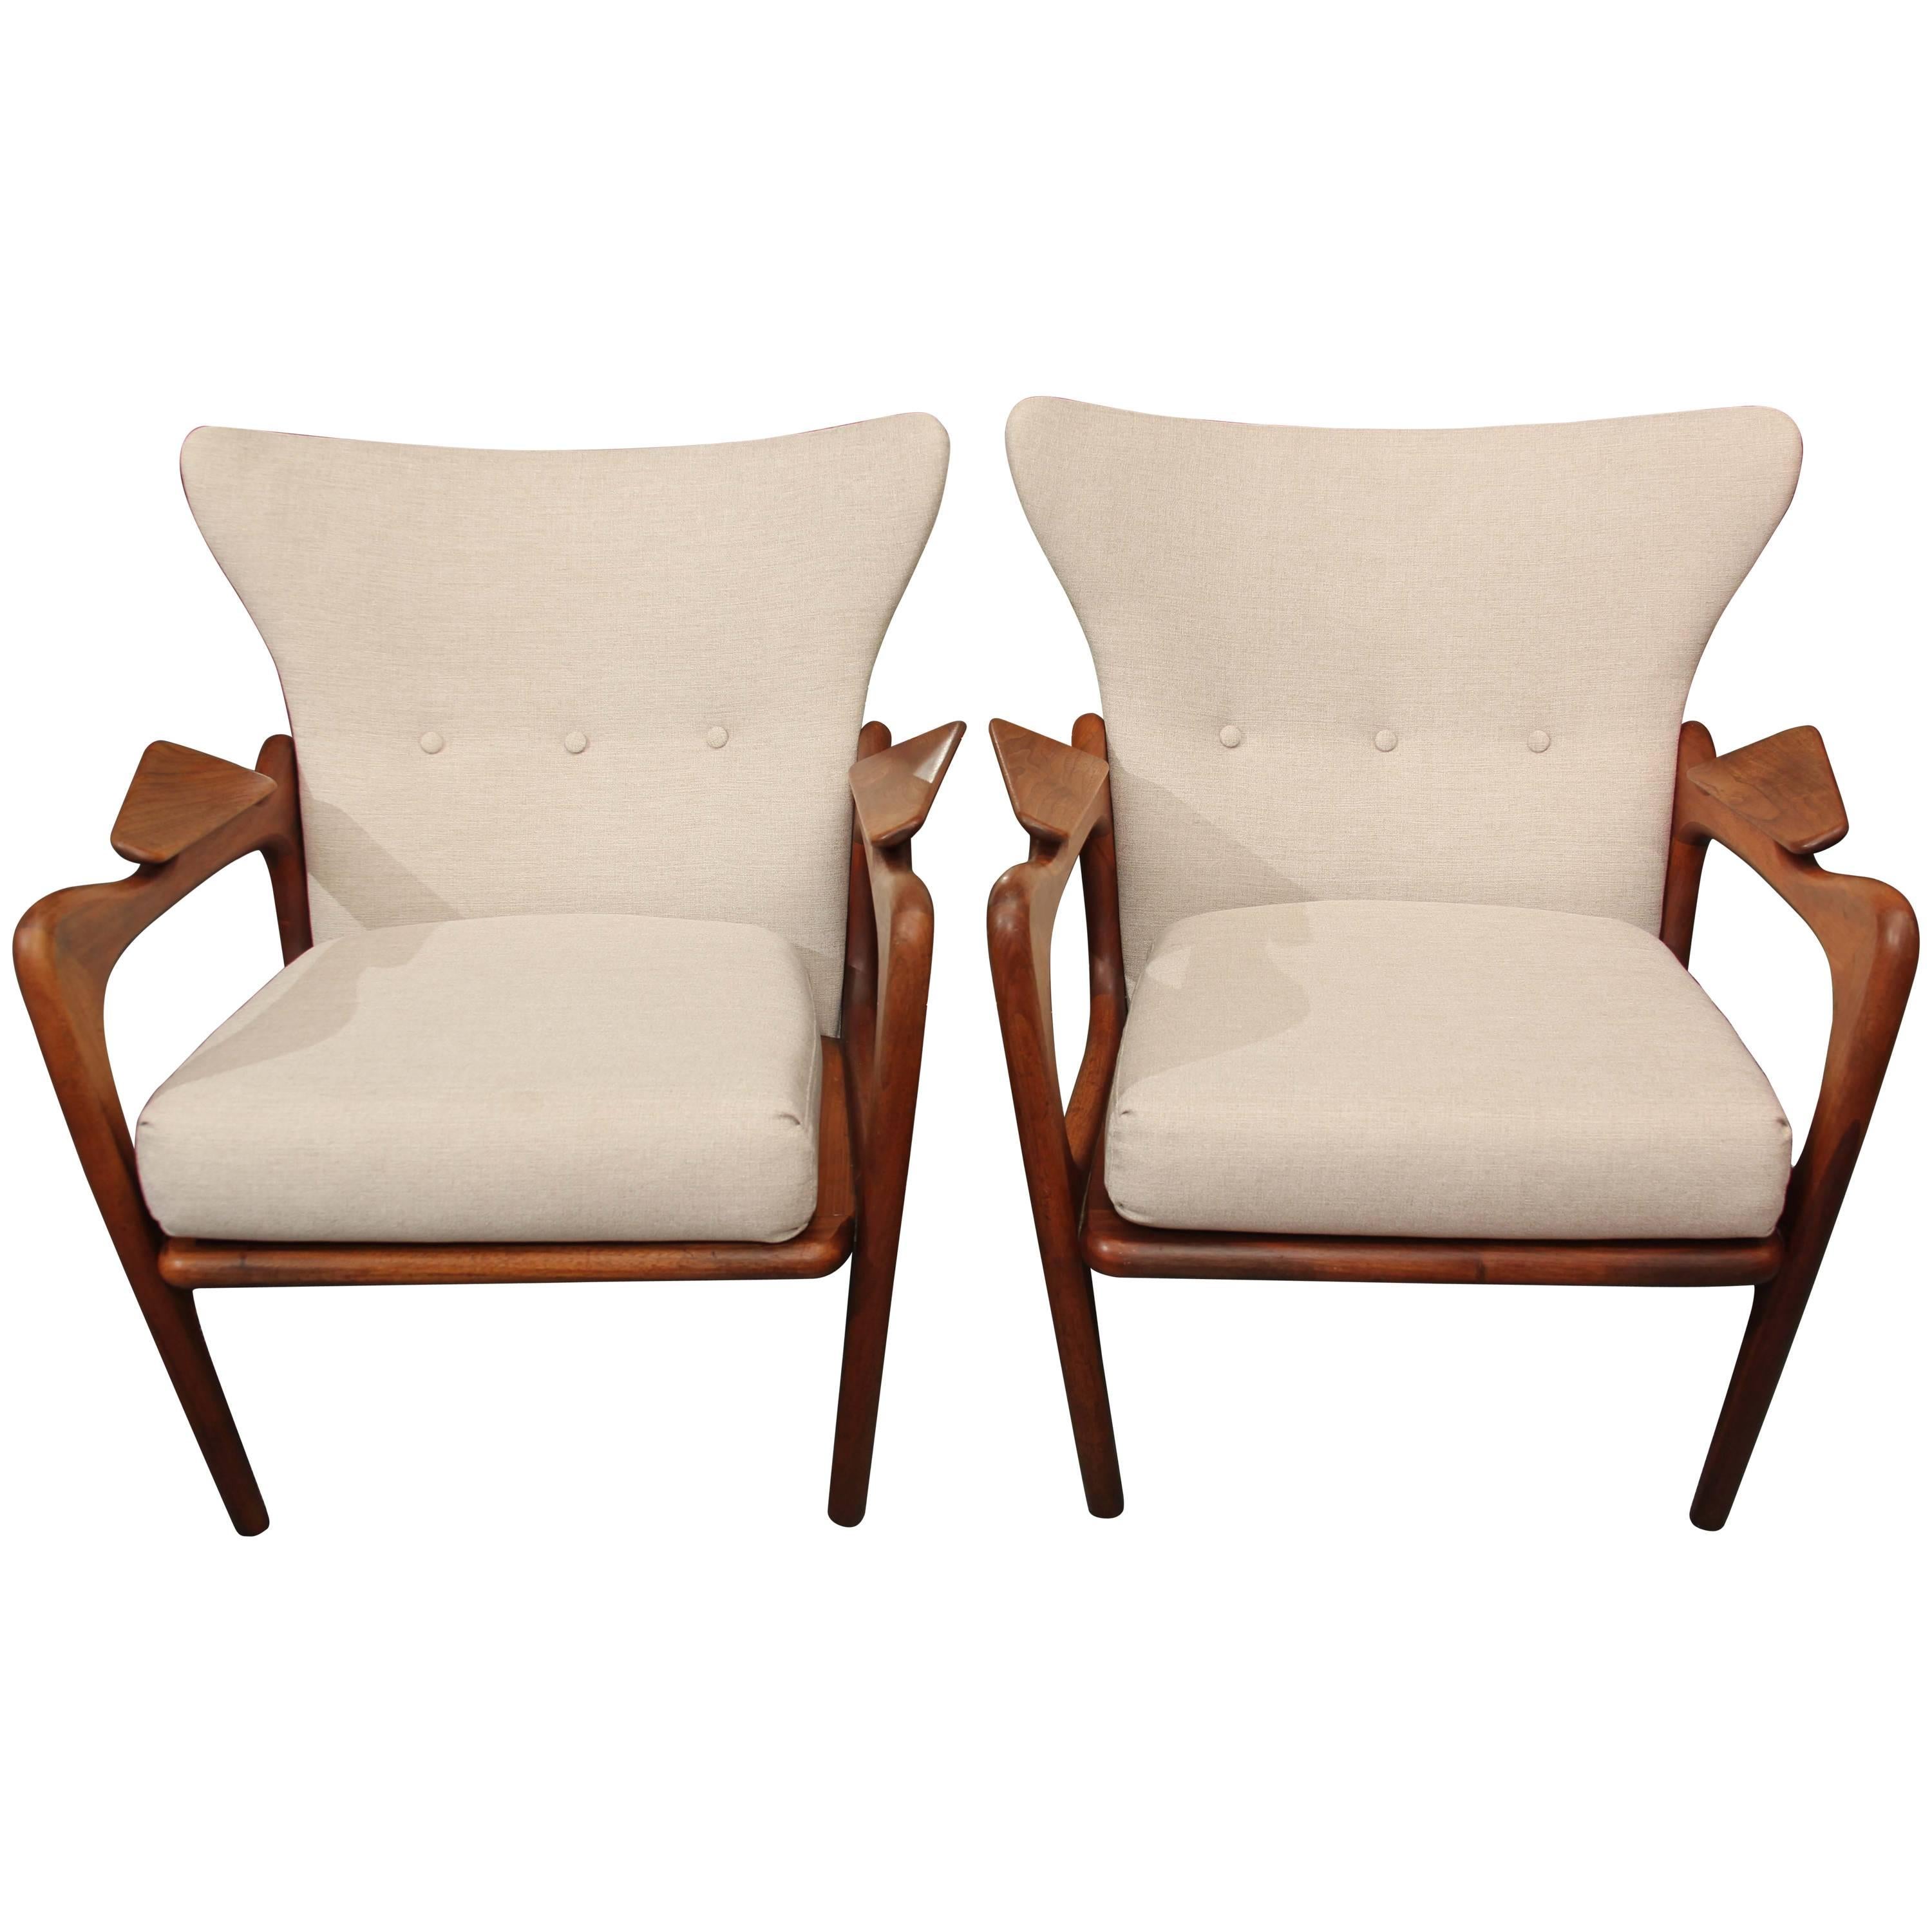 Nice pair of Adrian Pearsall sculptural lounge chairs.
Very comfortable and good looking from every angle.